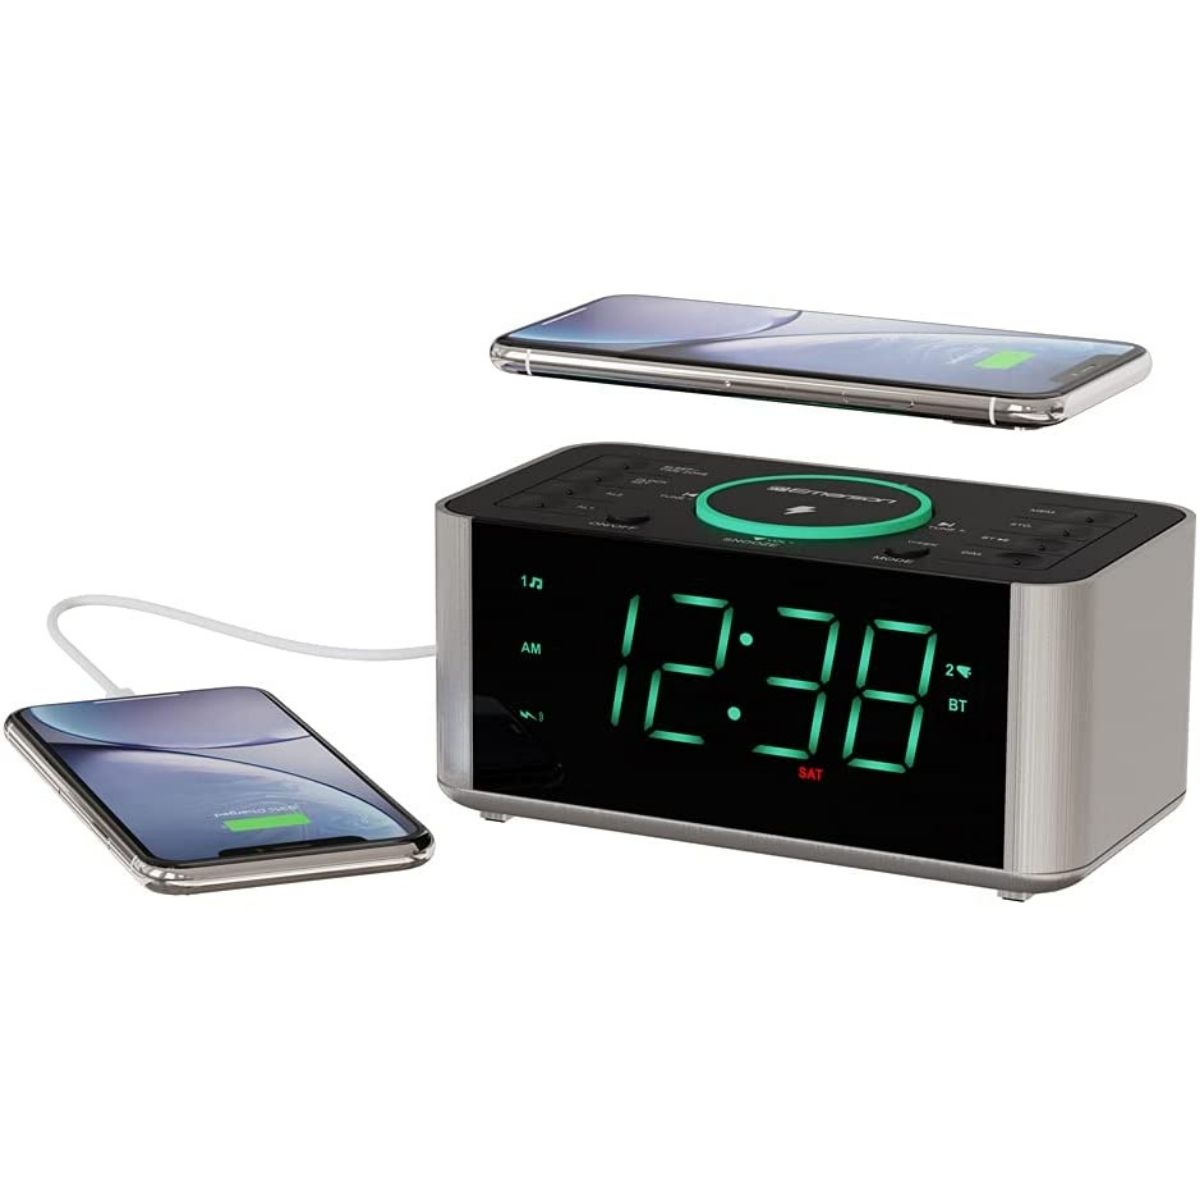 Emerson Alarm Clock Radio and Phone Charger